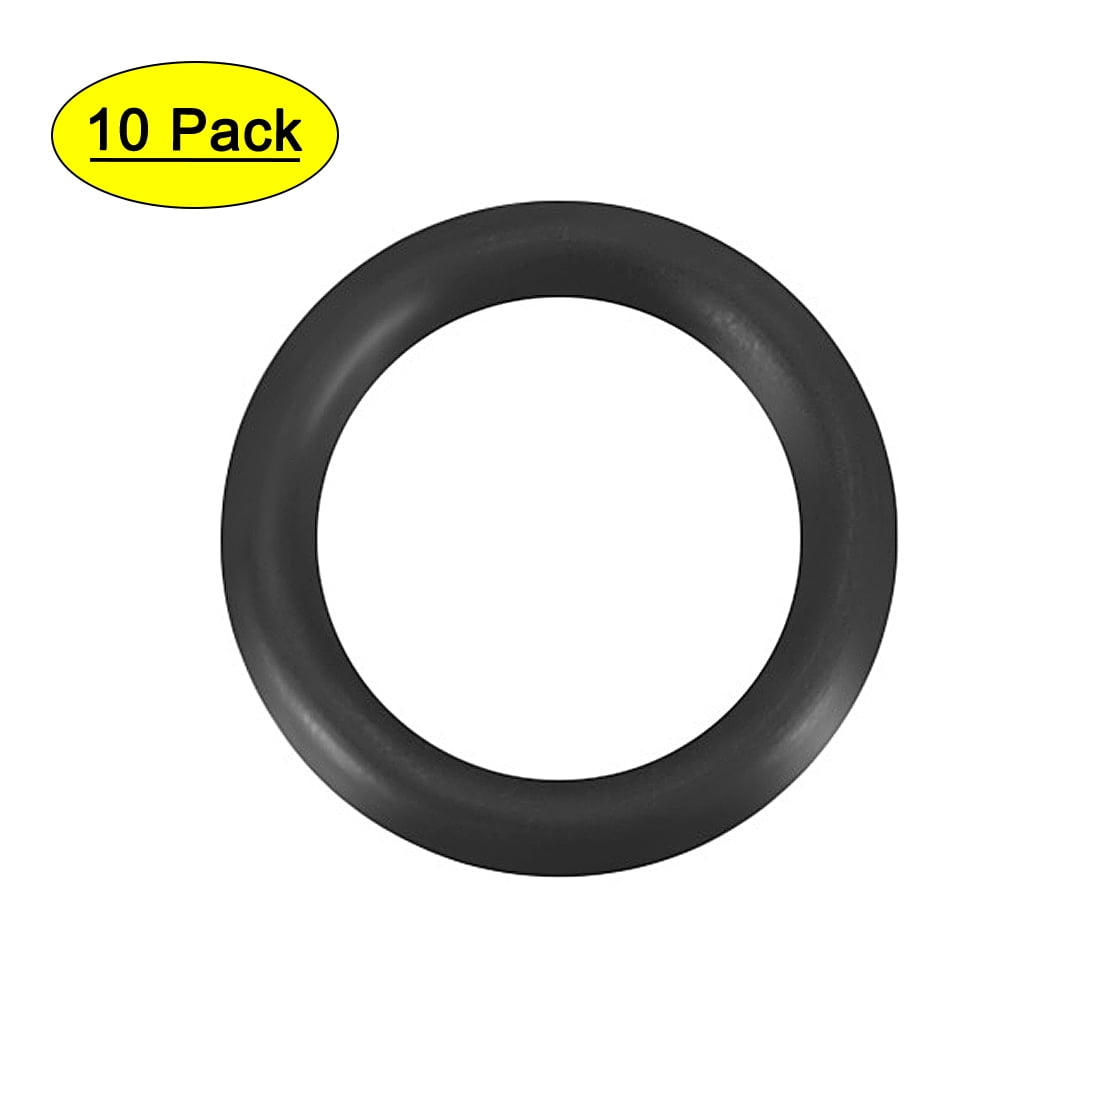 Silicone O-rings 21 x 2mm Price for 10 pcs 